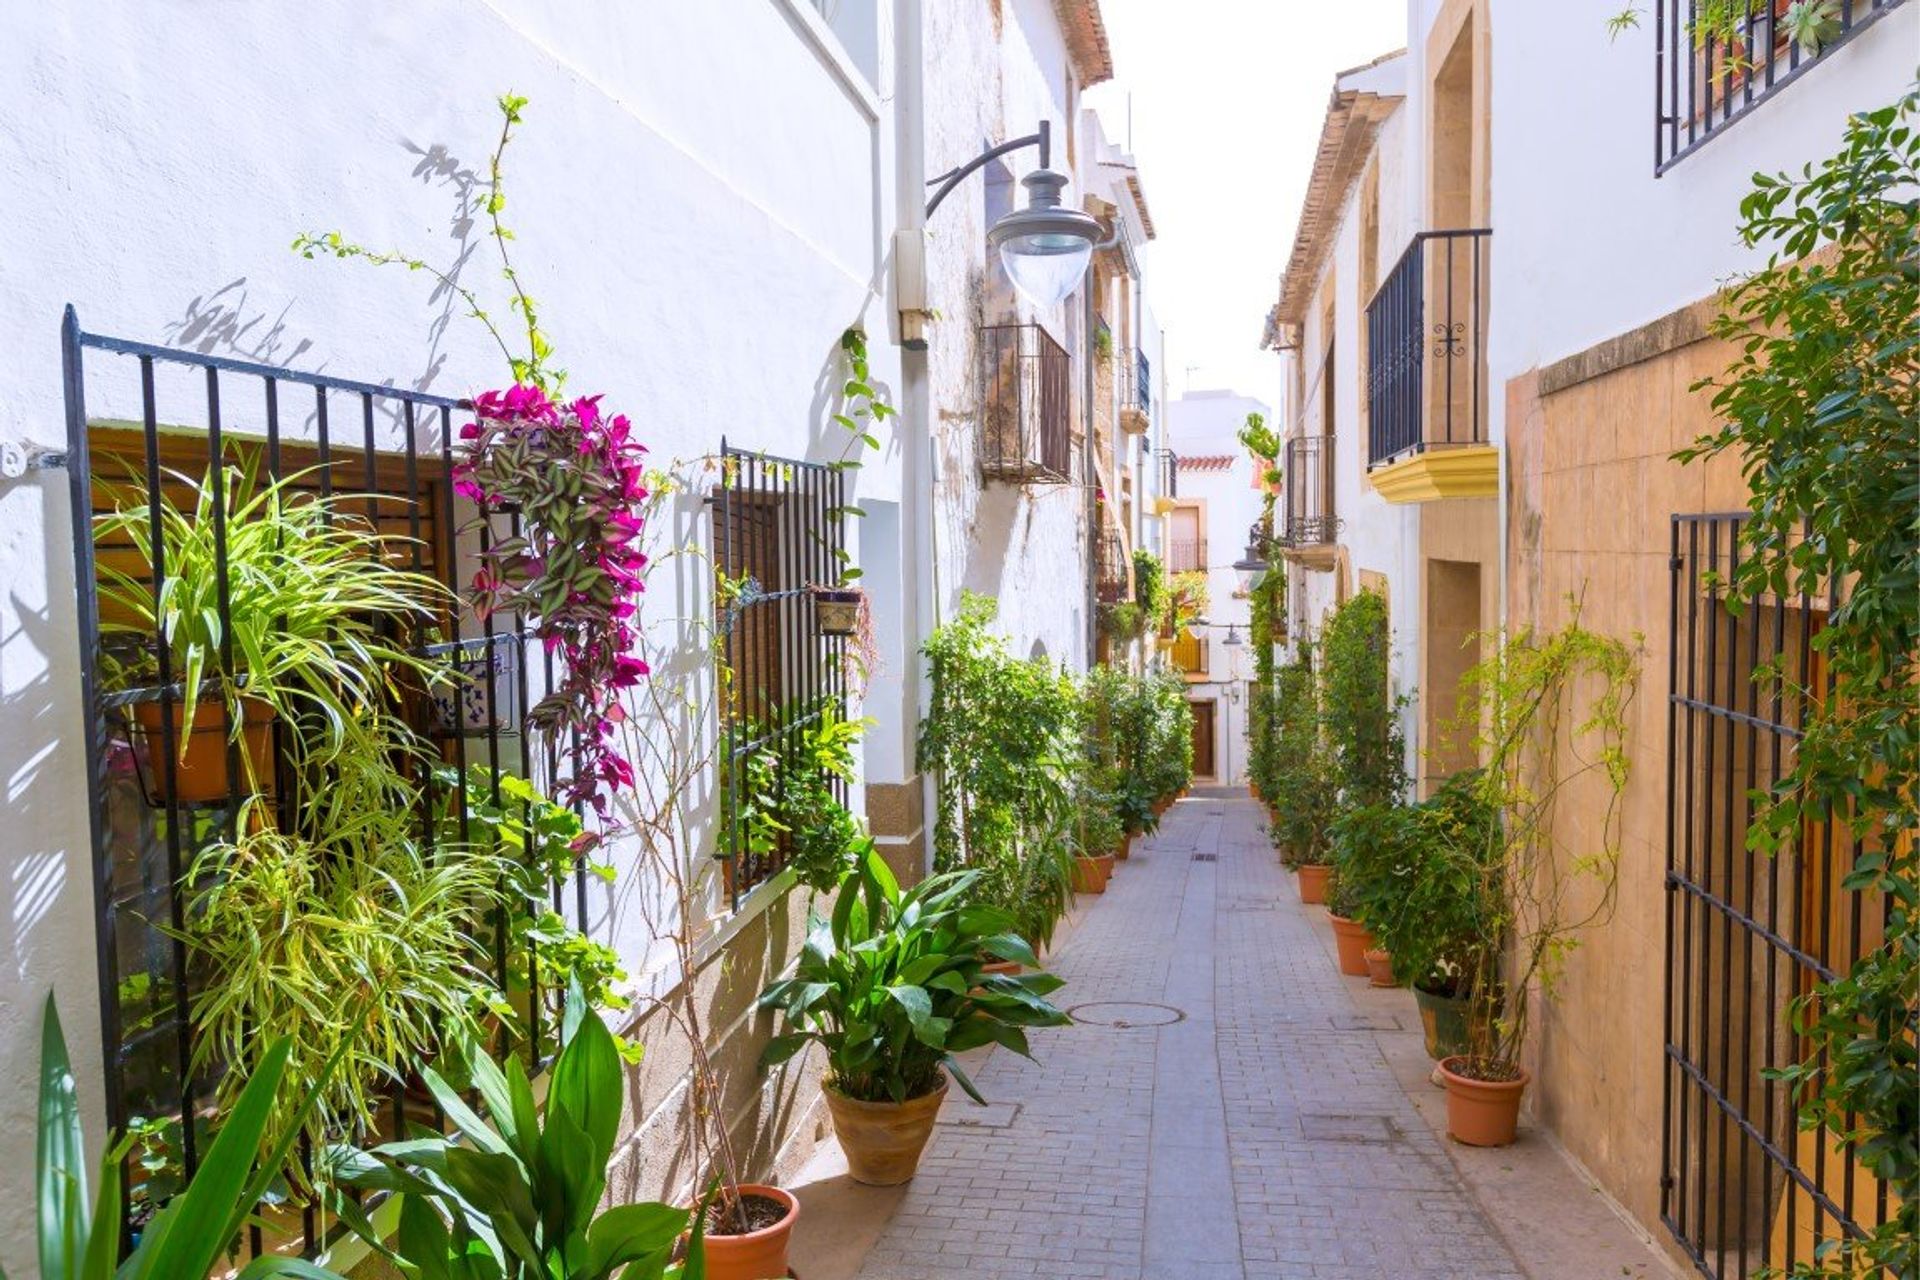 Javea's old quarter boasts all the charms of a traditional Valencian town